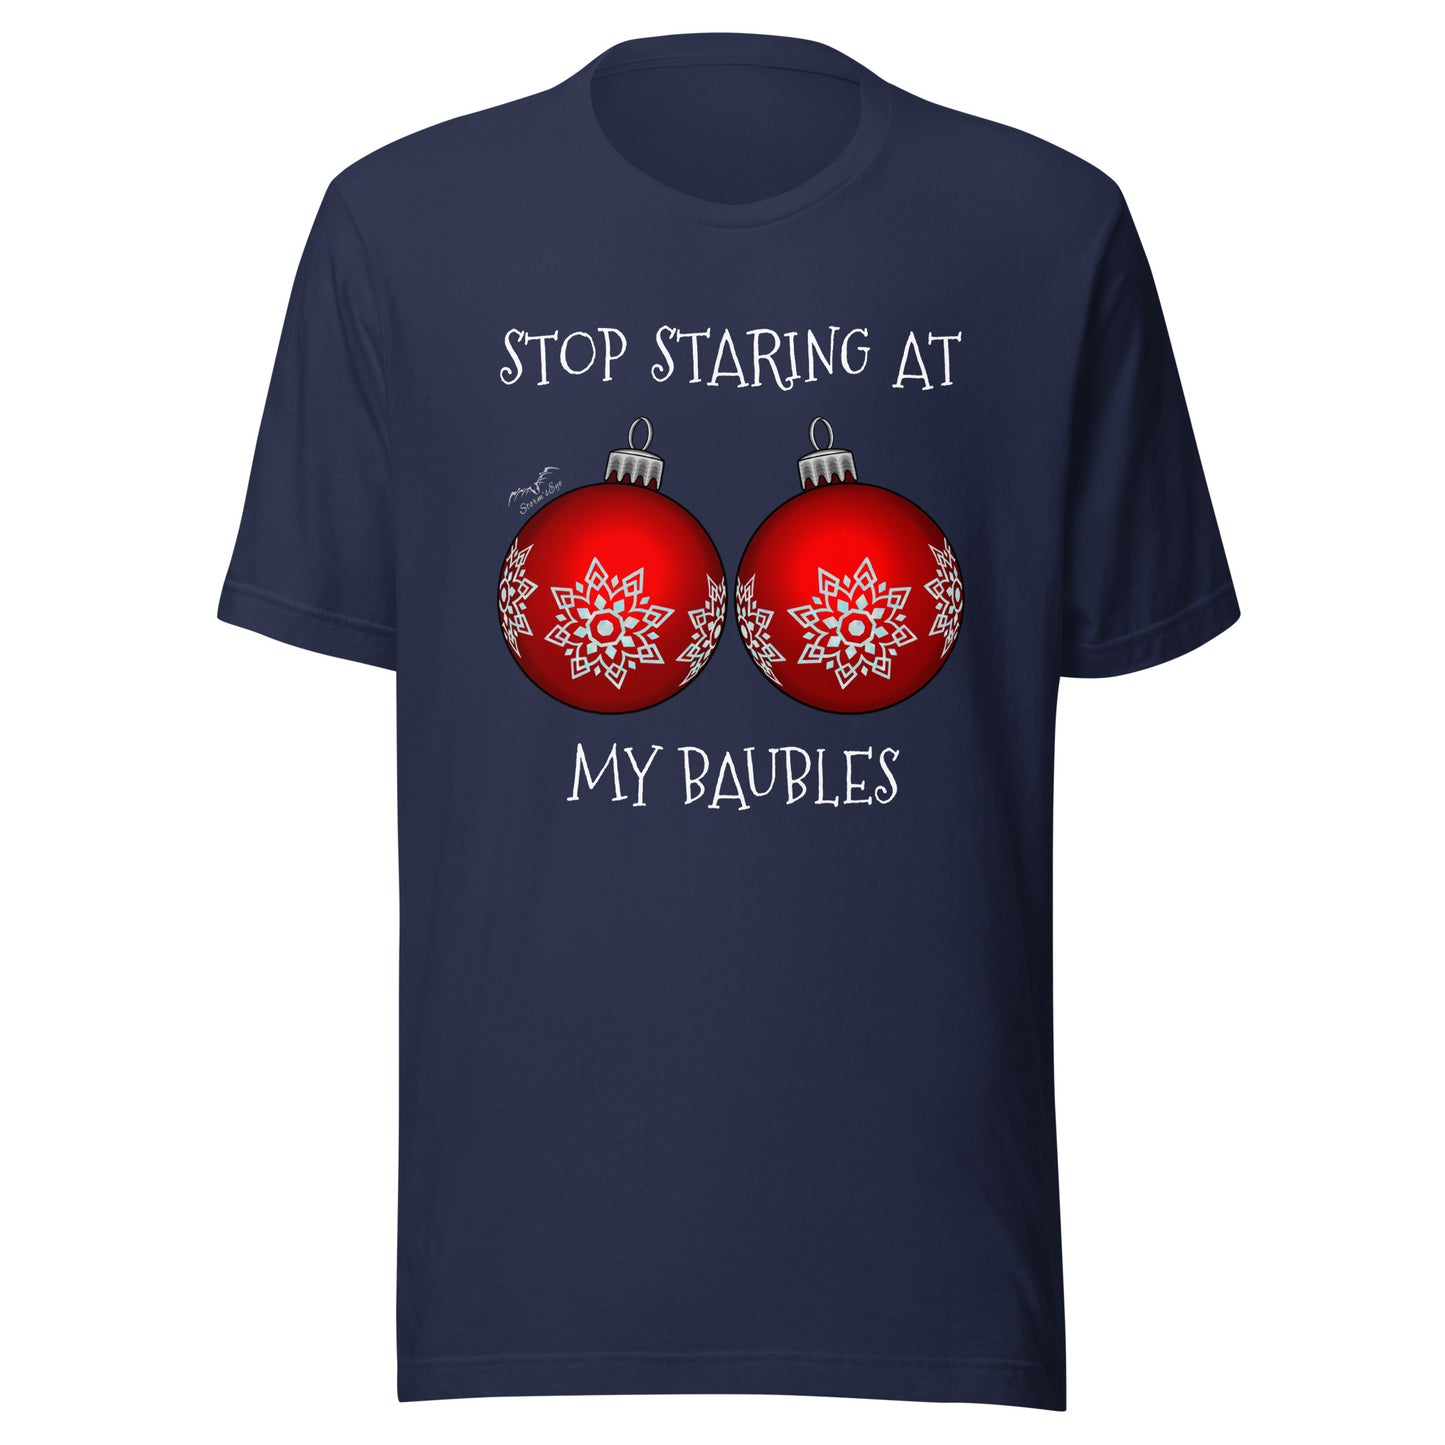 stormseye design stop staring baubles christmas T shirt, flat view navy blue